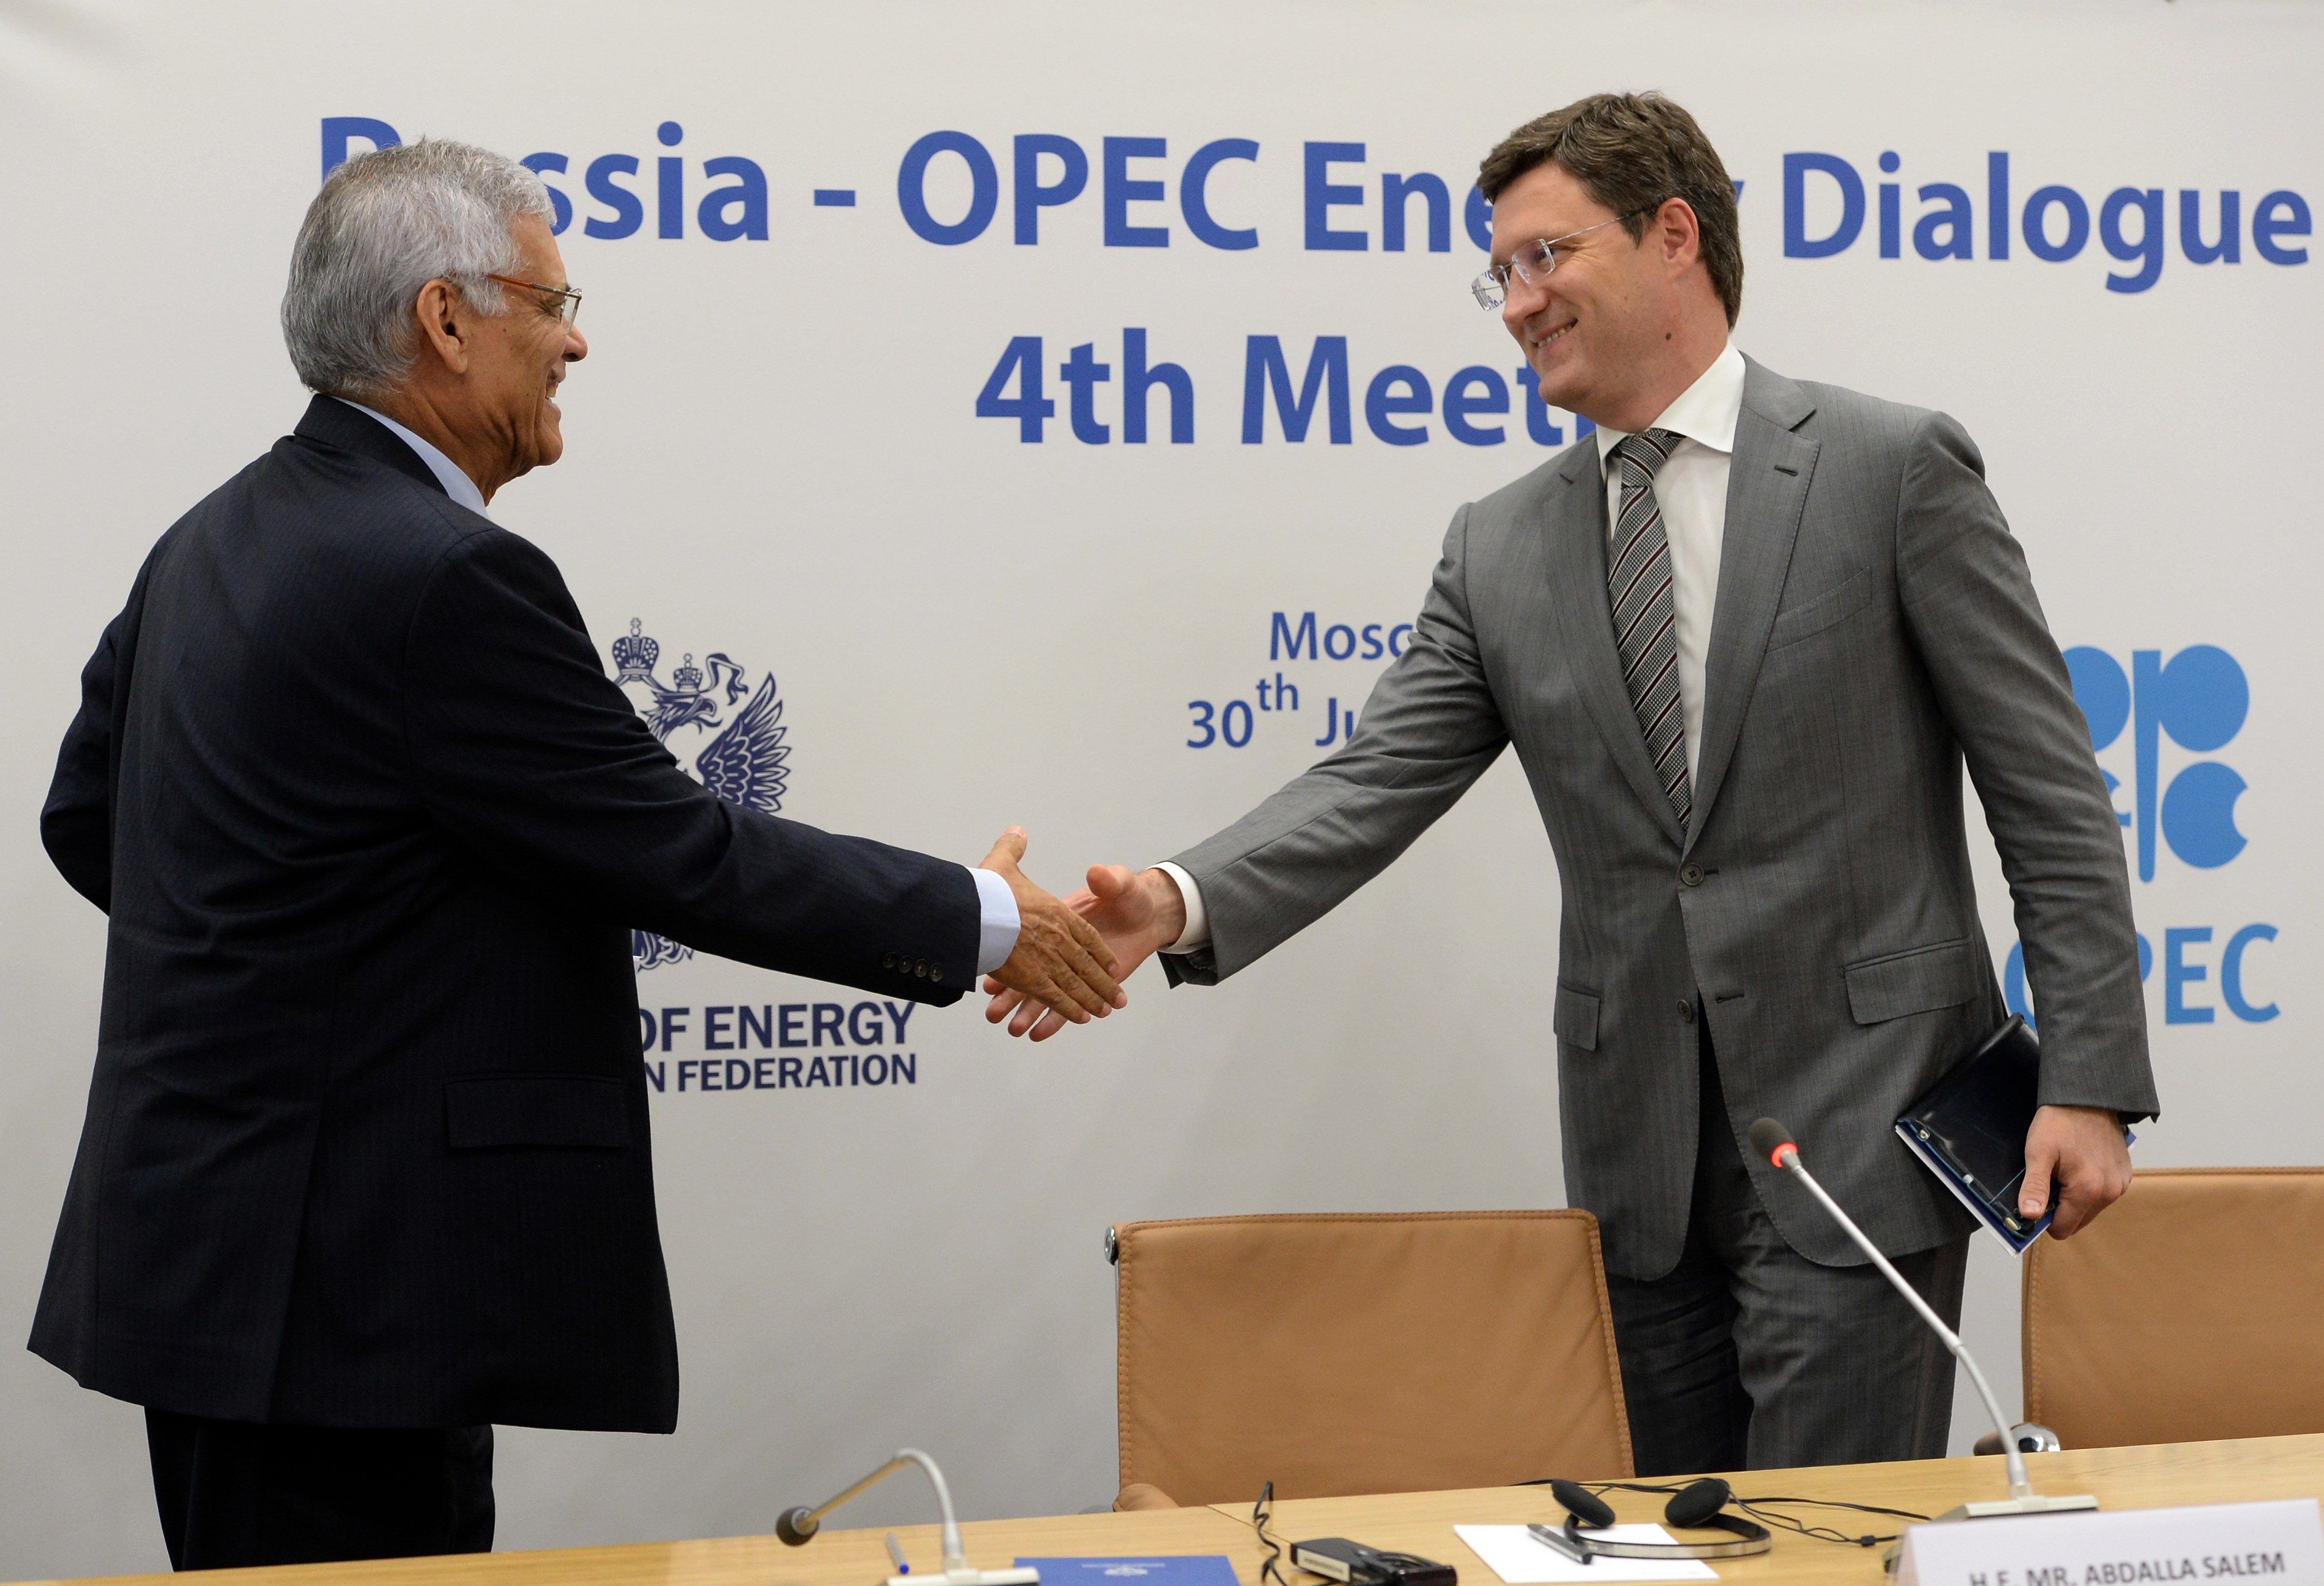 OPEC Secretary-General Abdalla Salem El-Badri and Russia's Energy Minister Alexander Novak shake hands during a press-conference after Russia-OPEC energy dialogue meeting in Moscow on July 30, 2015. (Vasily Maximov—AFP/Getty Images)